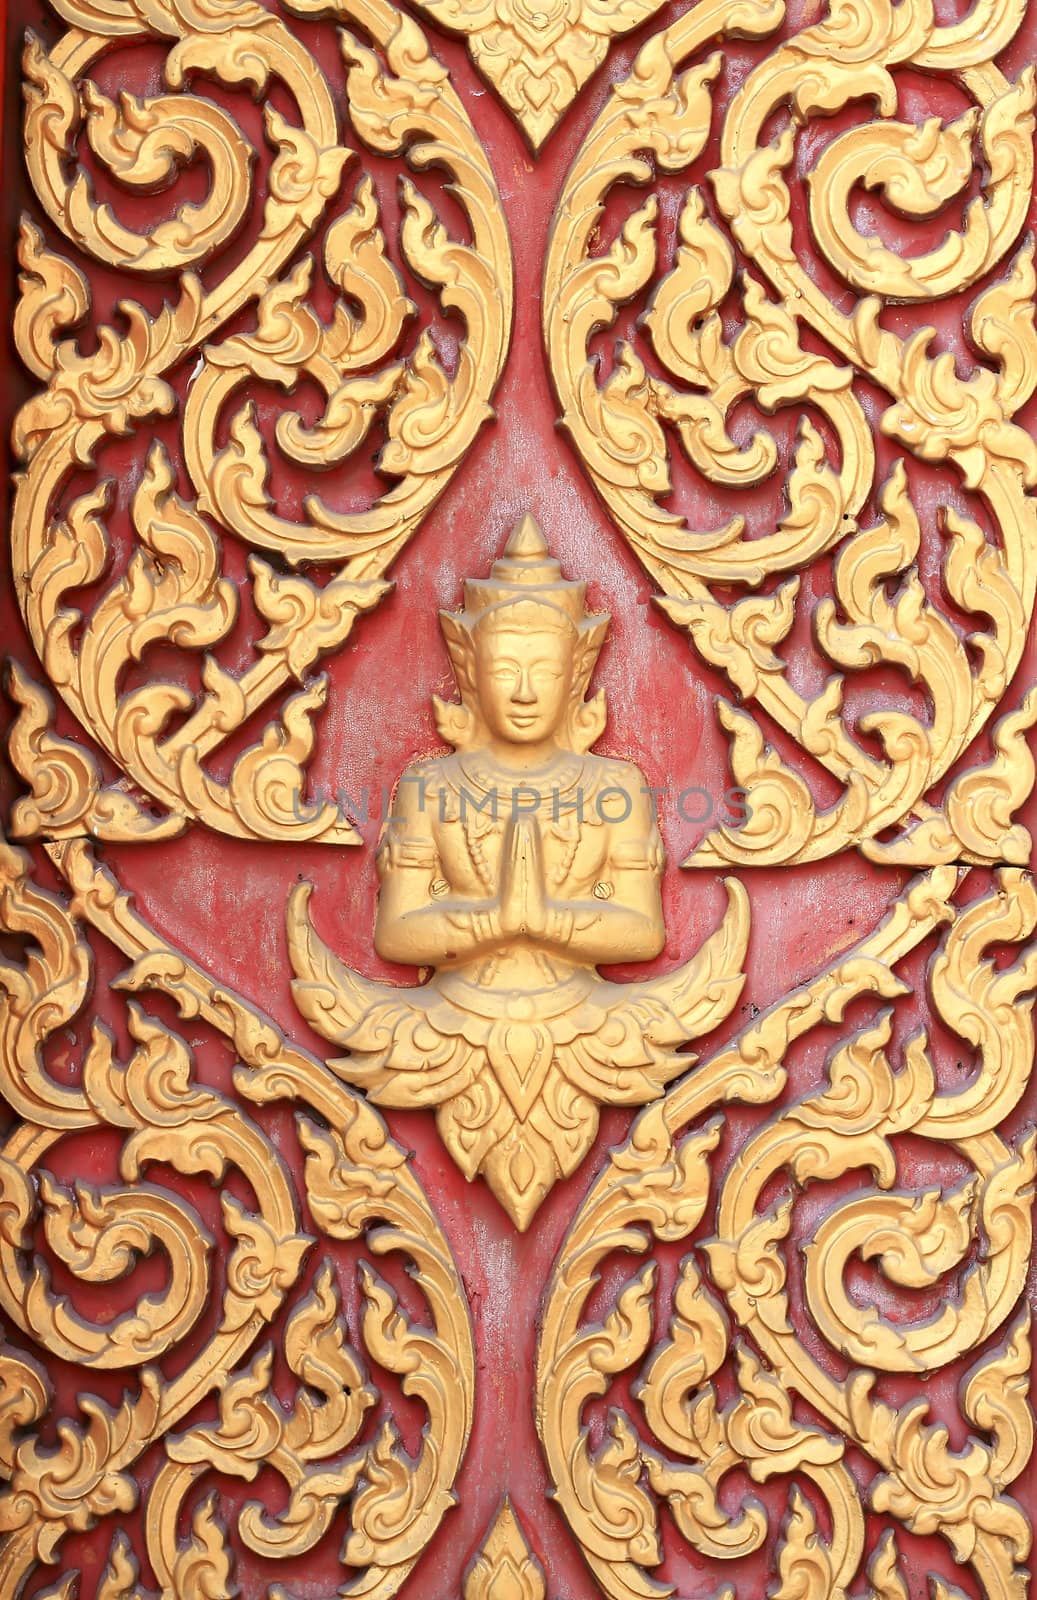 raditional thai style art carving at the door of temple by rufous